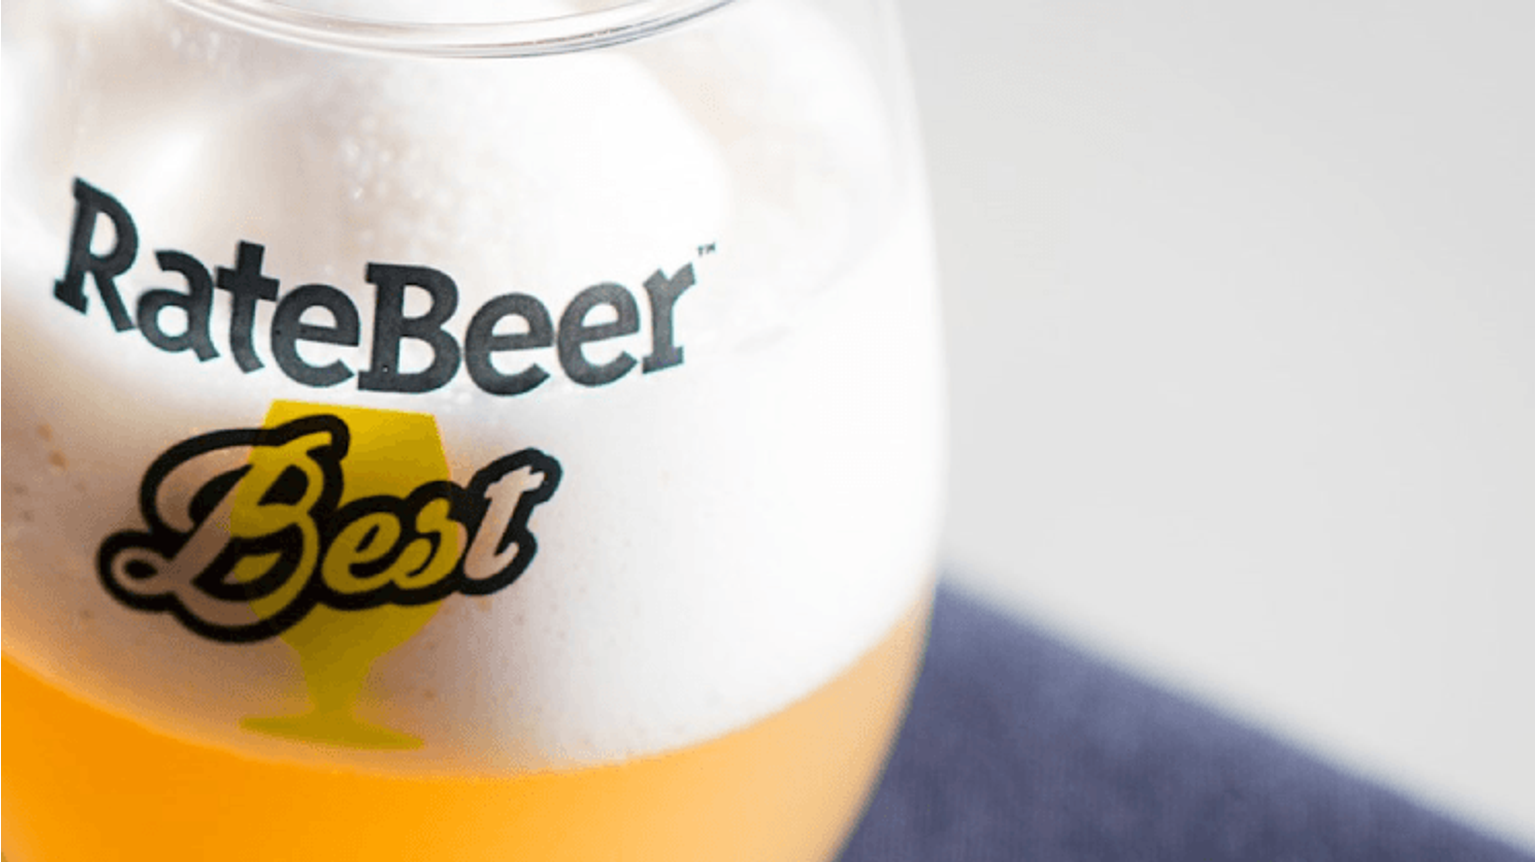 thumbnail for blog article named: Beer of the Year - I migliori Awards di RateBeer